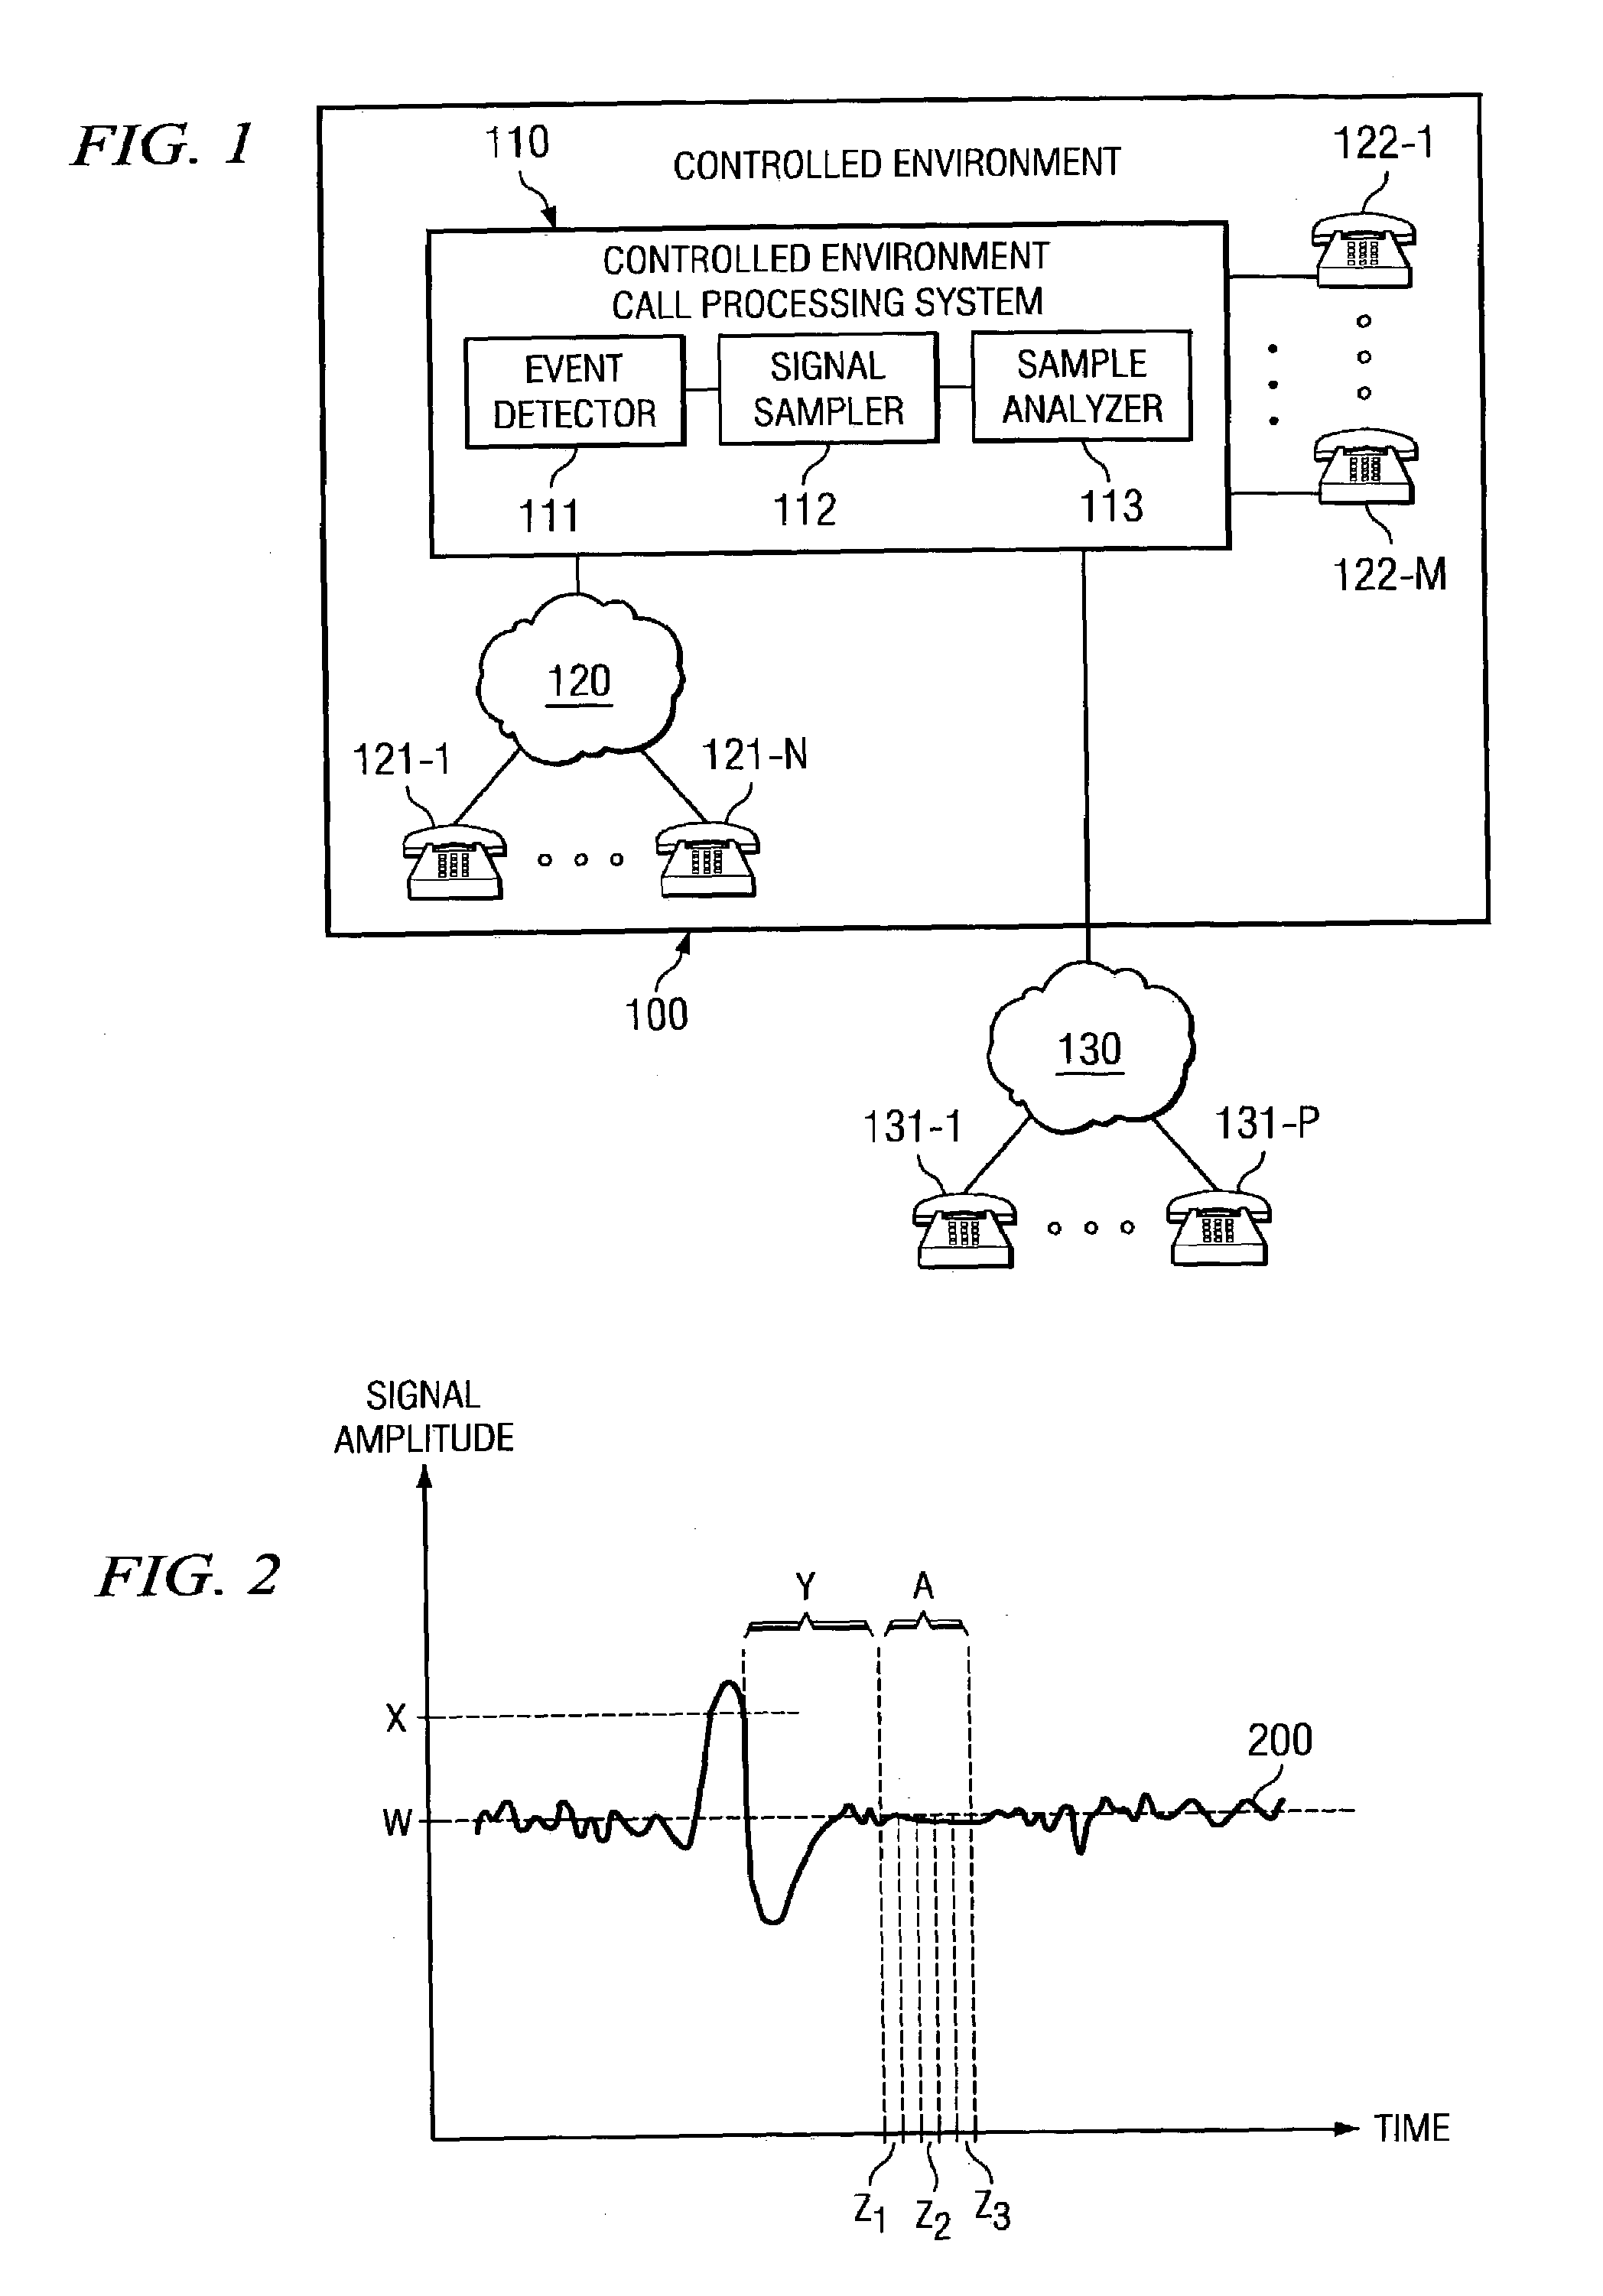 System and method for detecting unauthorized call activity